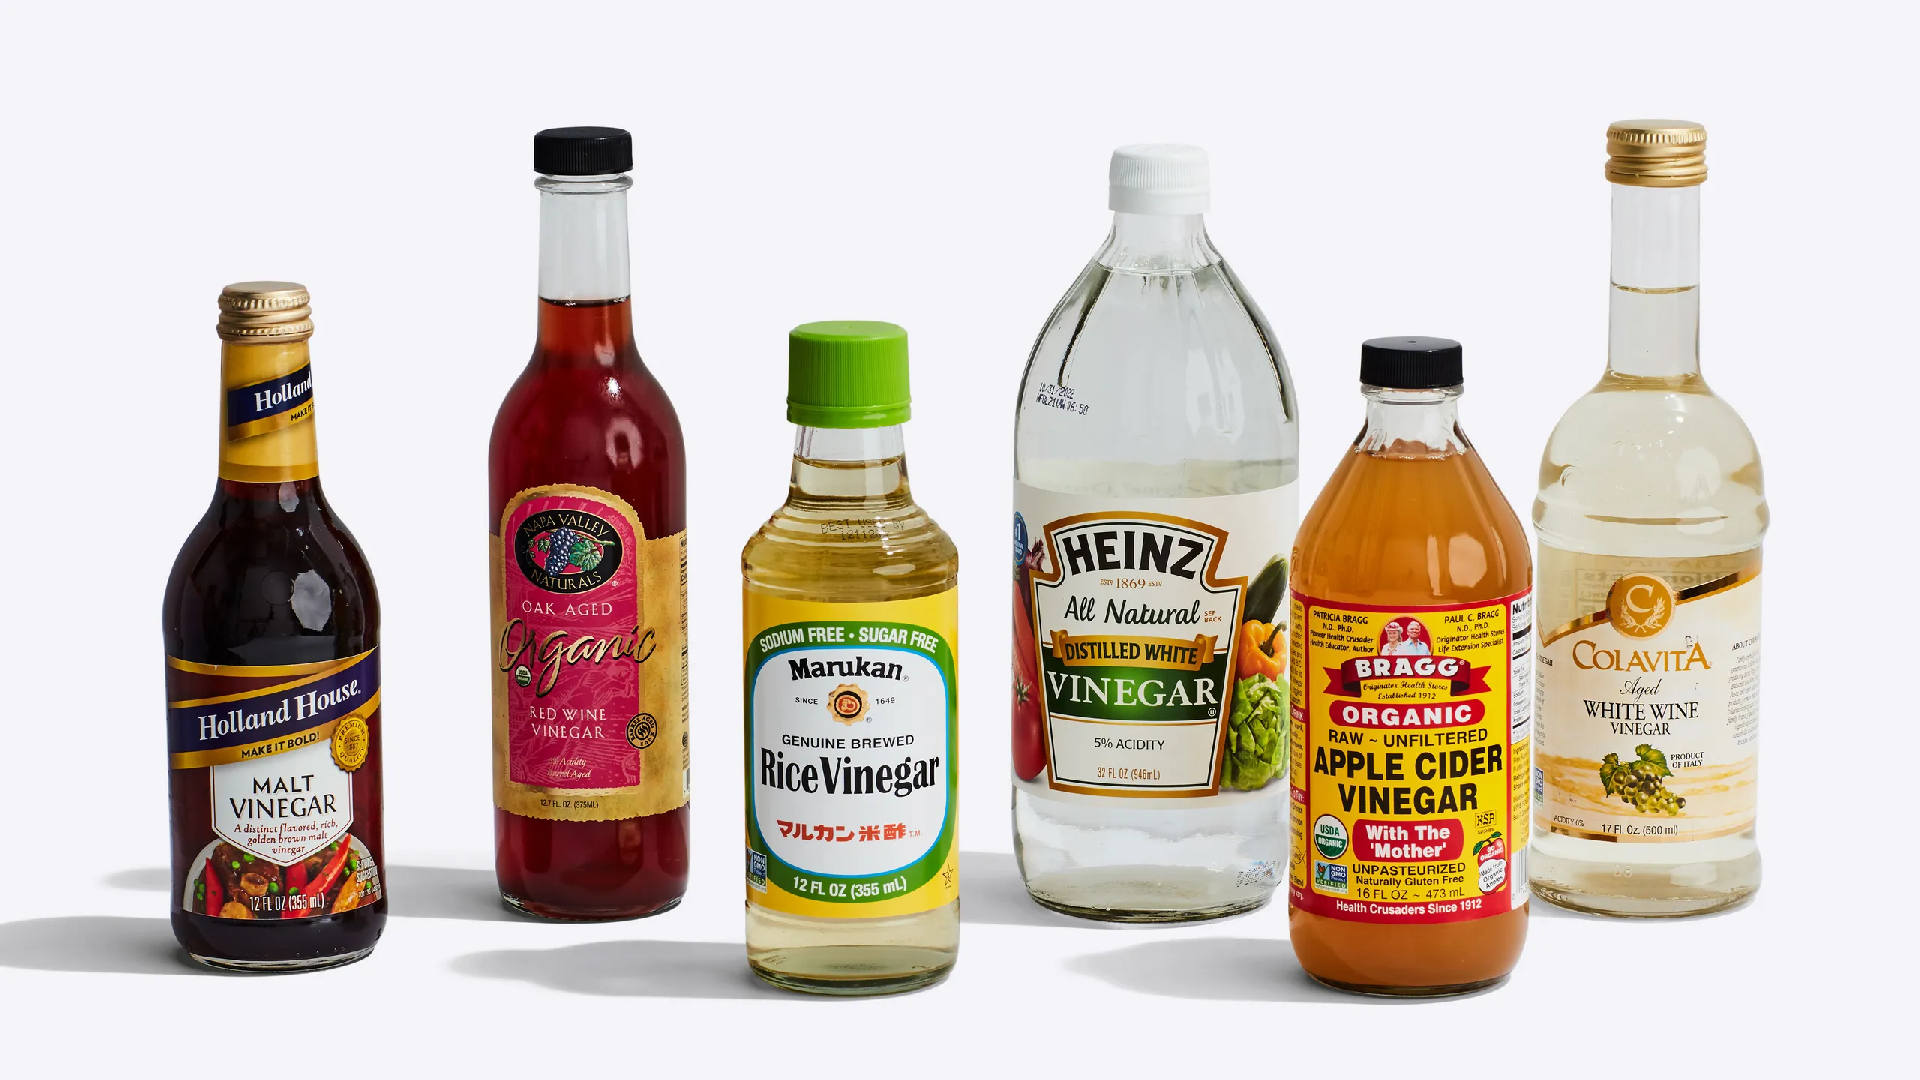 A selection of Rice Wine Vinegar Substitutes displayed on a kitchen countertop, ready to transform any recipe with their unique flavors and culinary potential.